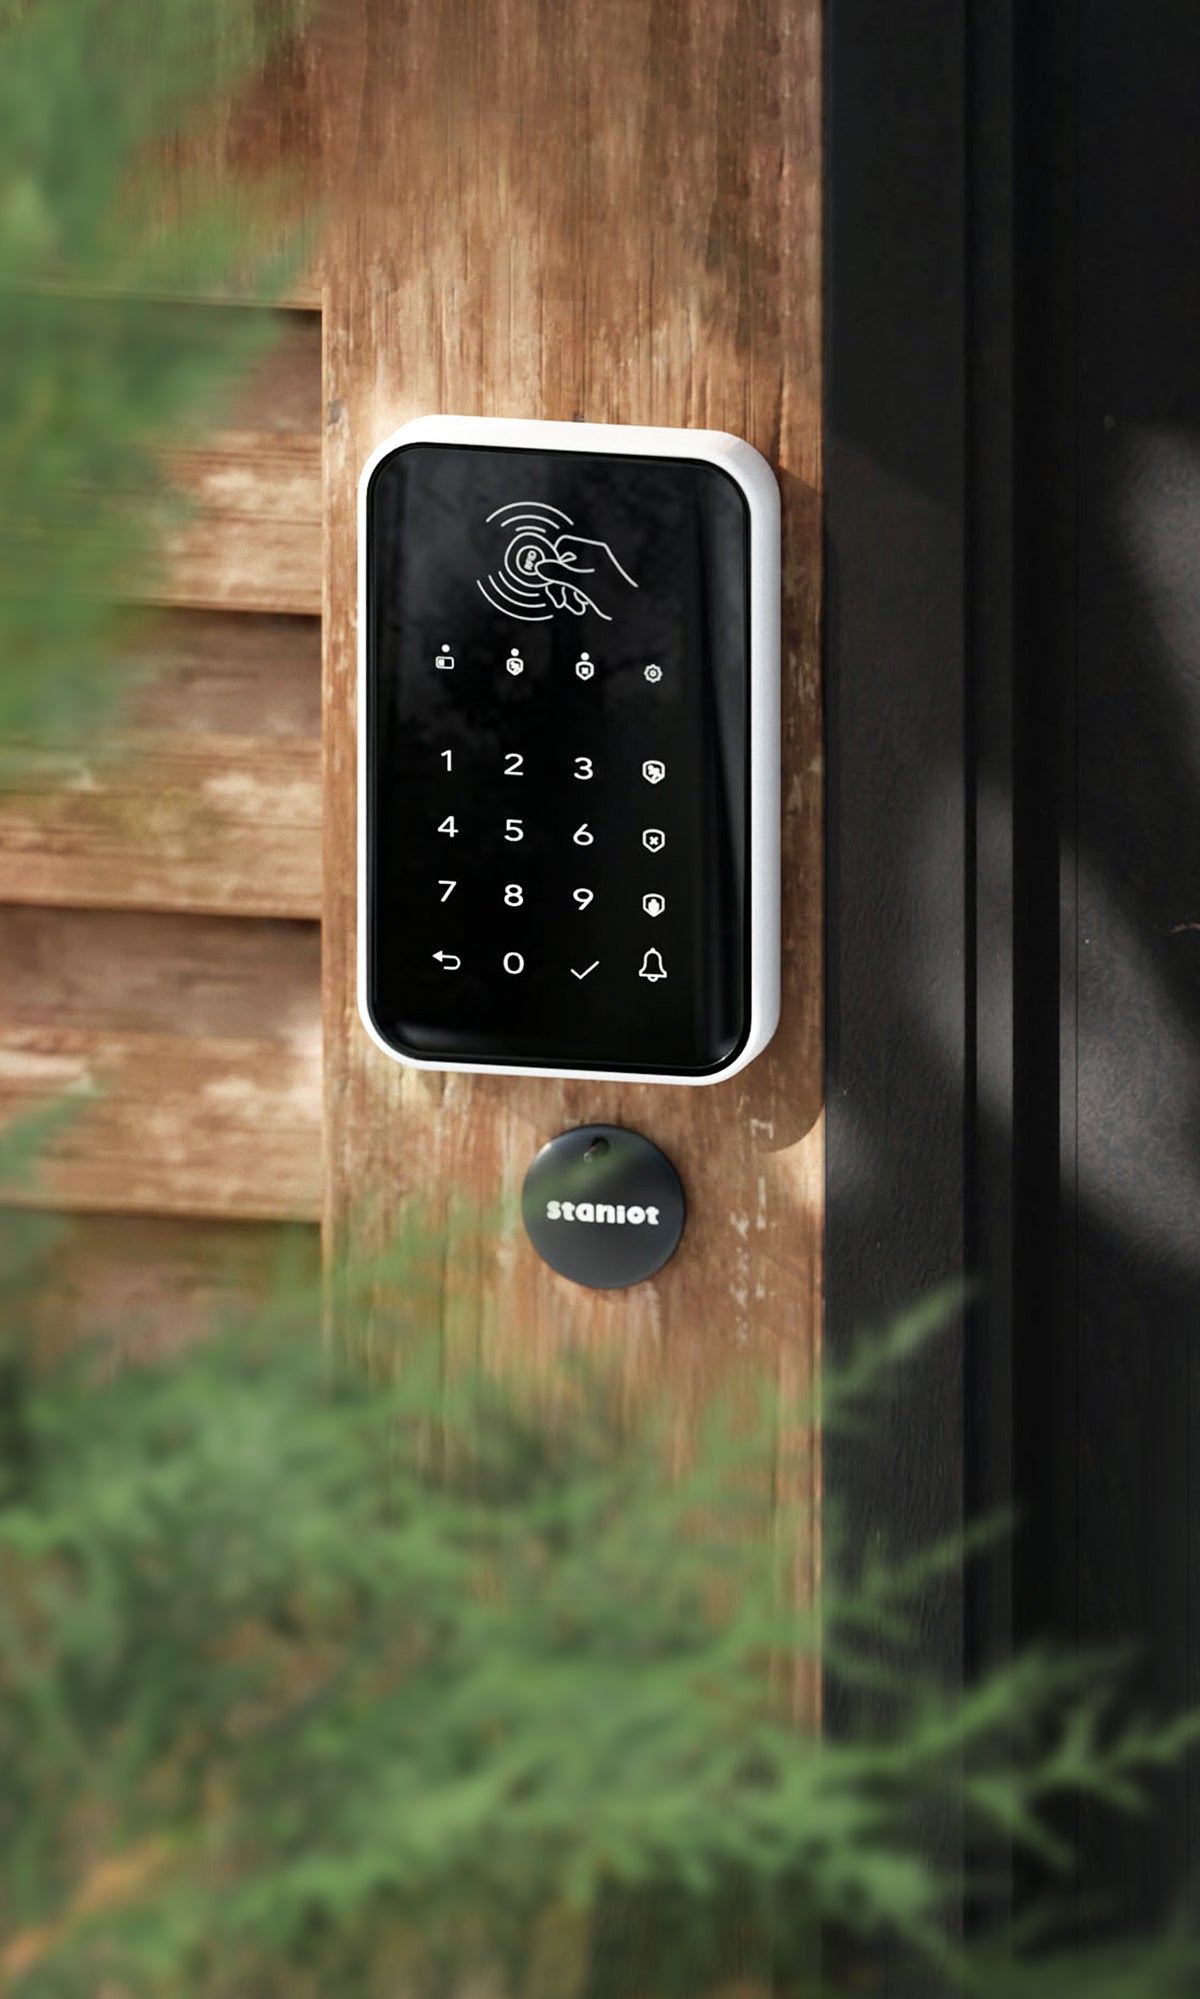 Staniot K010, RFID Wireless Alarm Touch Pad near home door entry with green vegetation on the far left